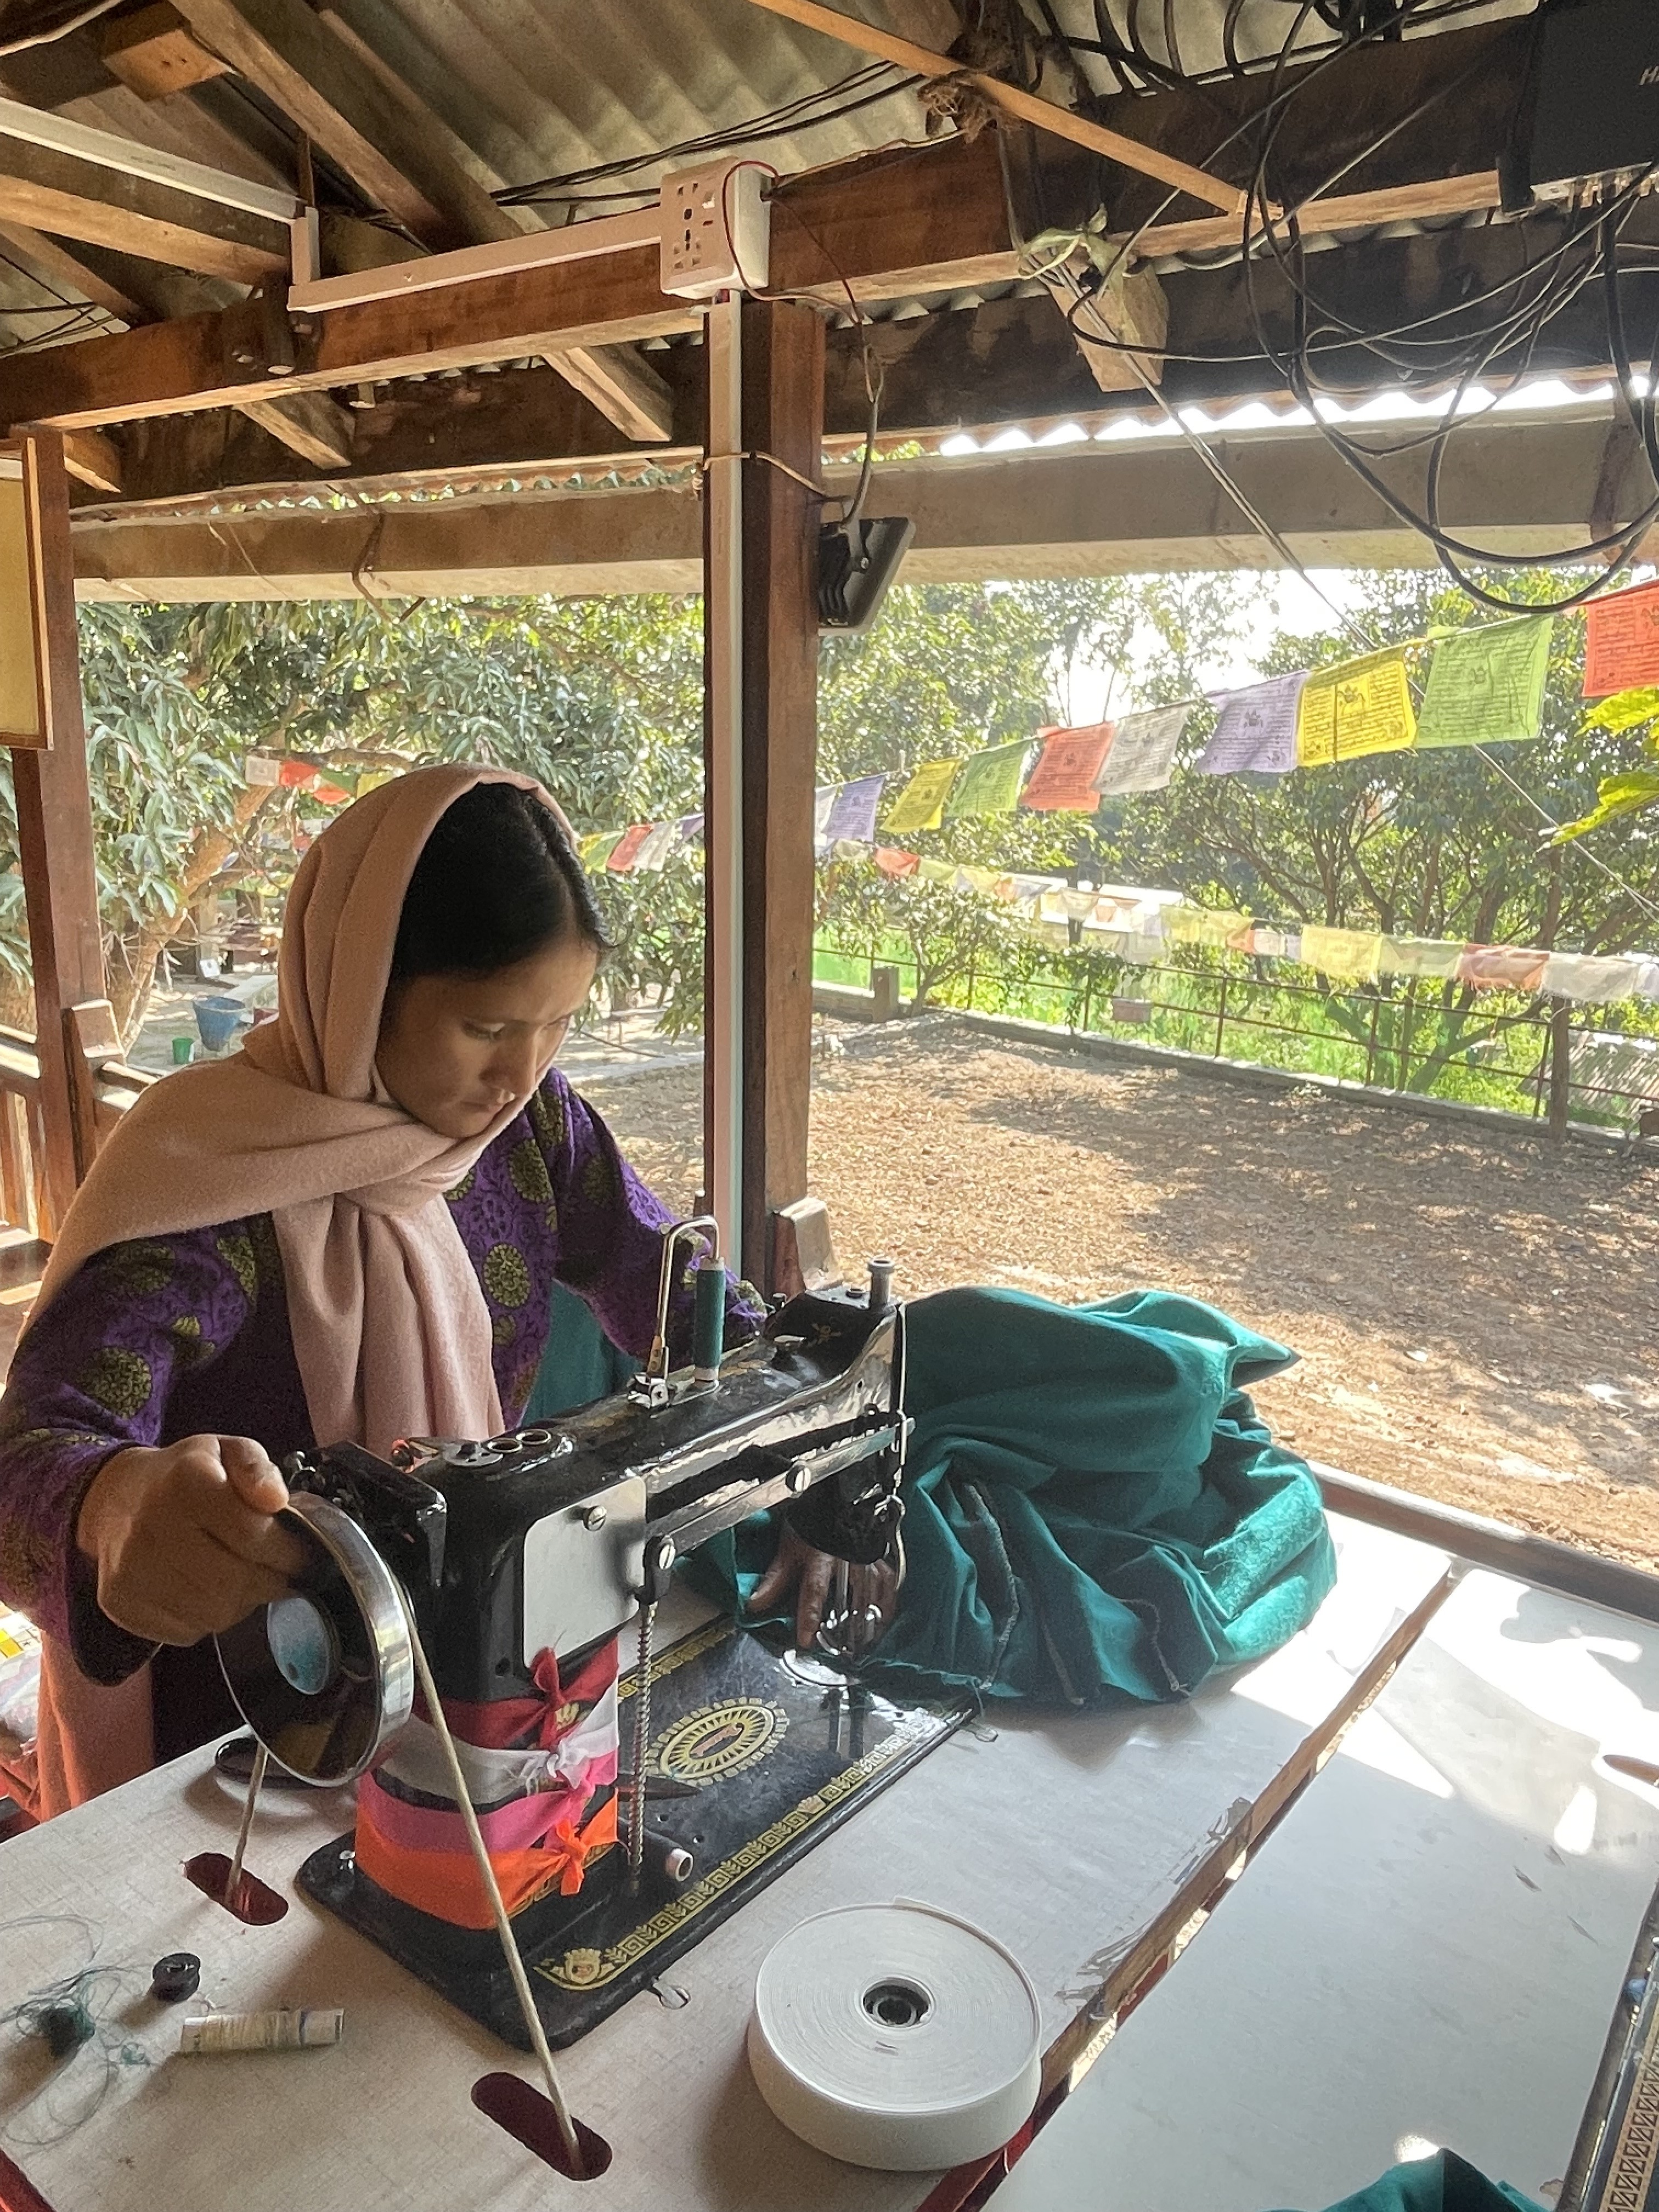 A woman works with a sewing machine on an outdoor porch with a lush tree background.